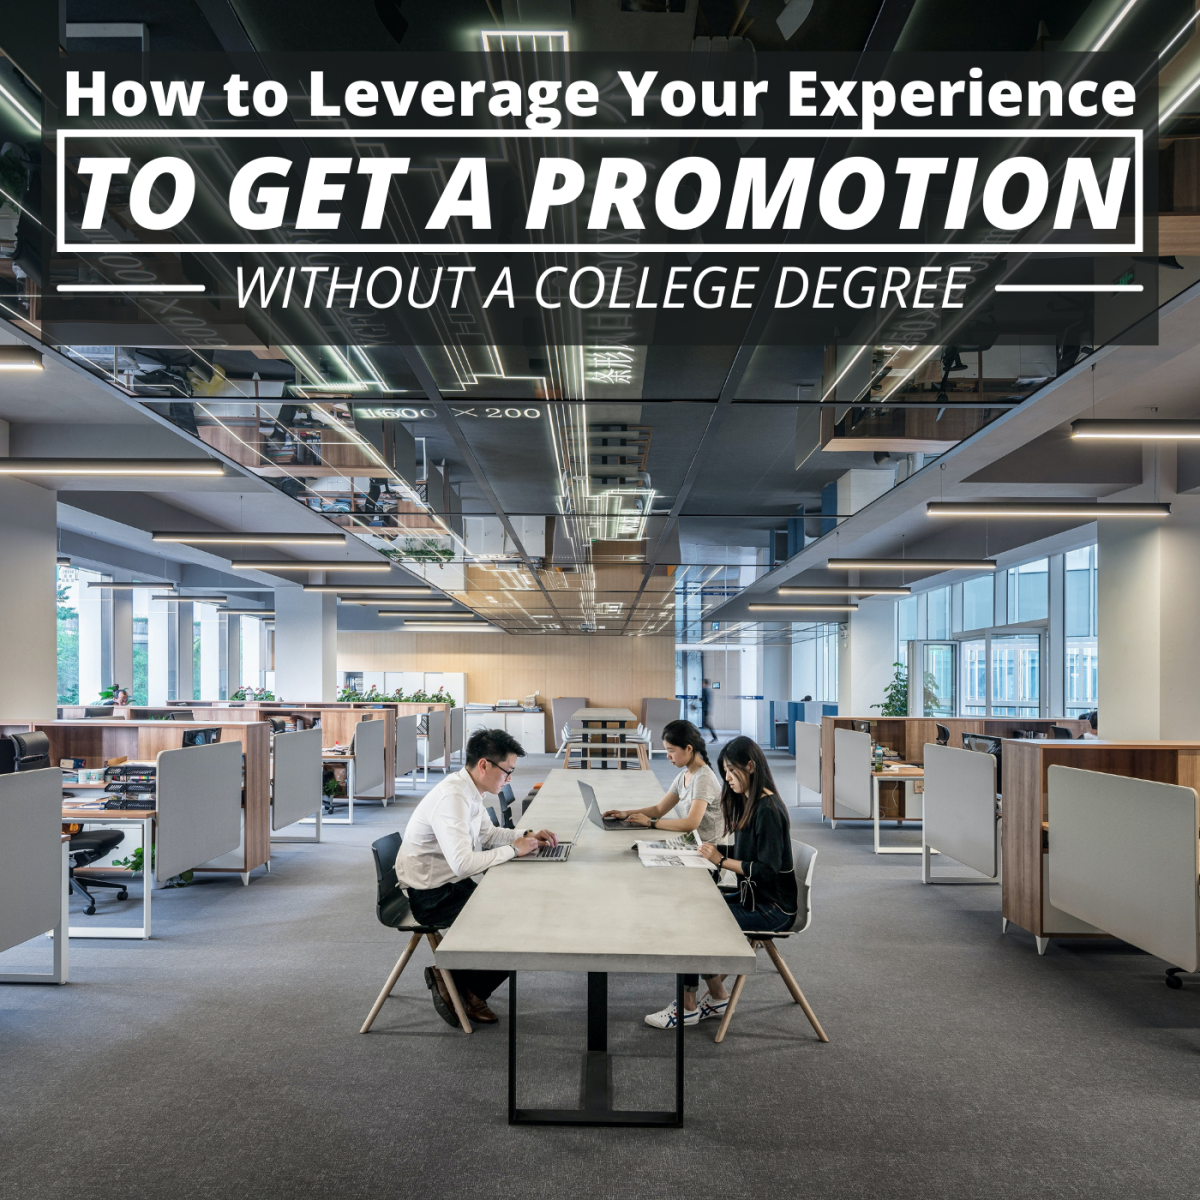 How to Get a Promotion Without a College Degree